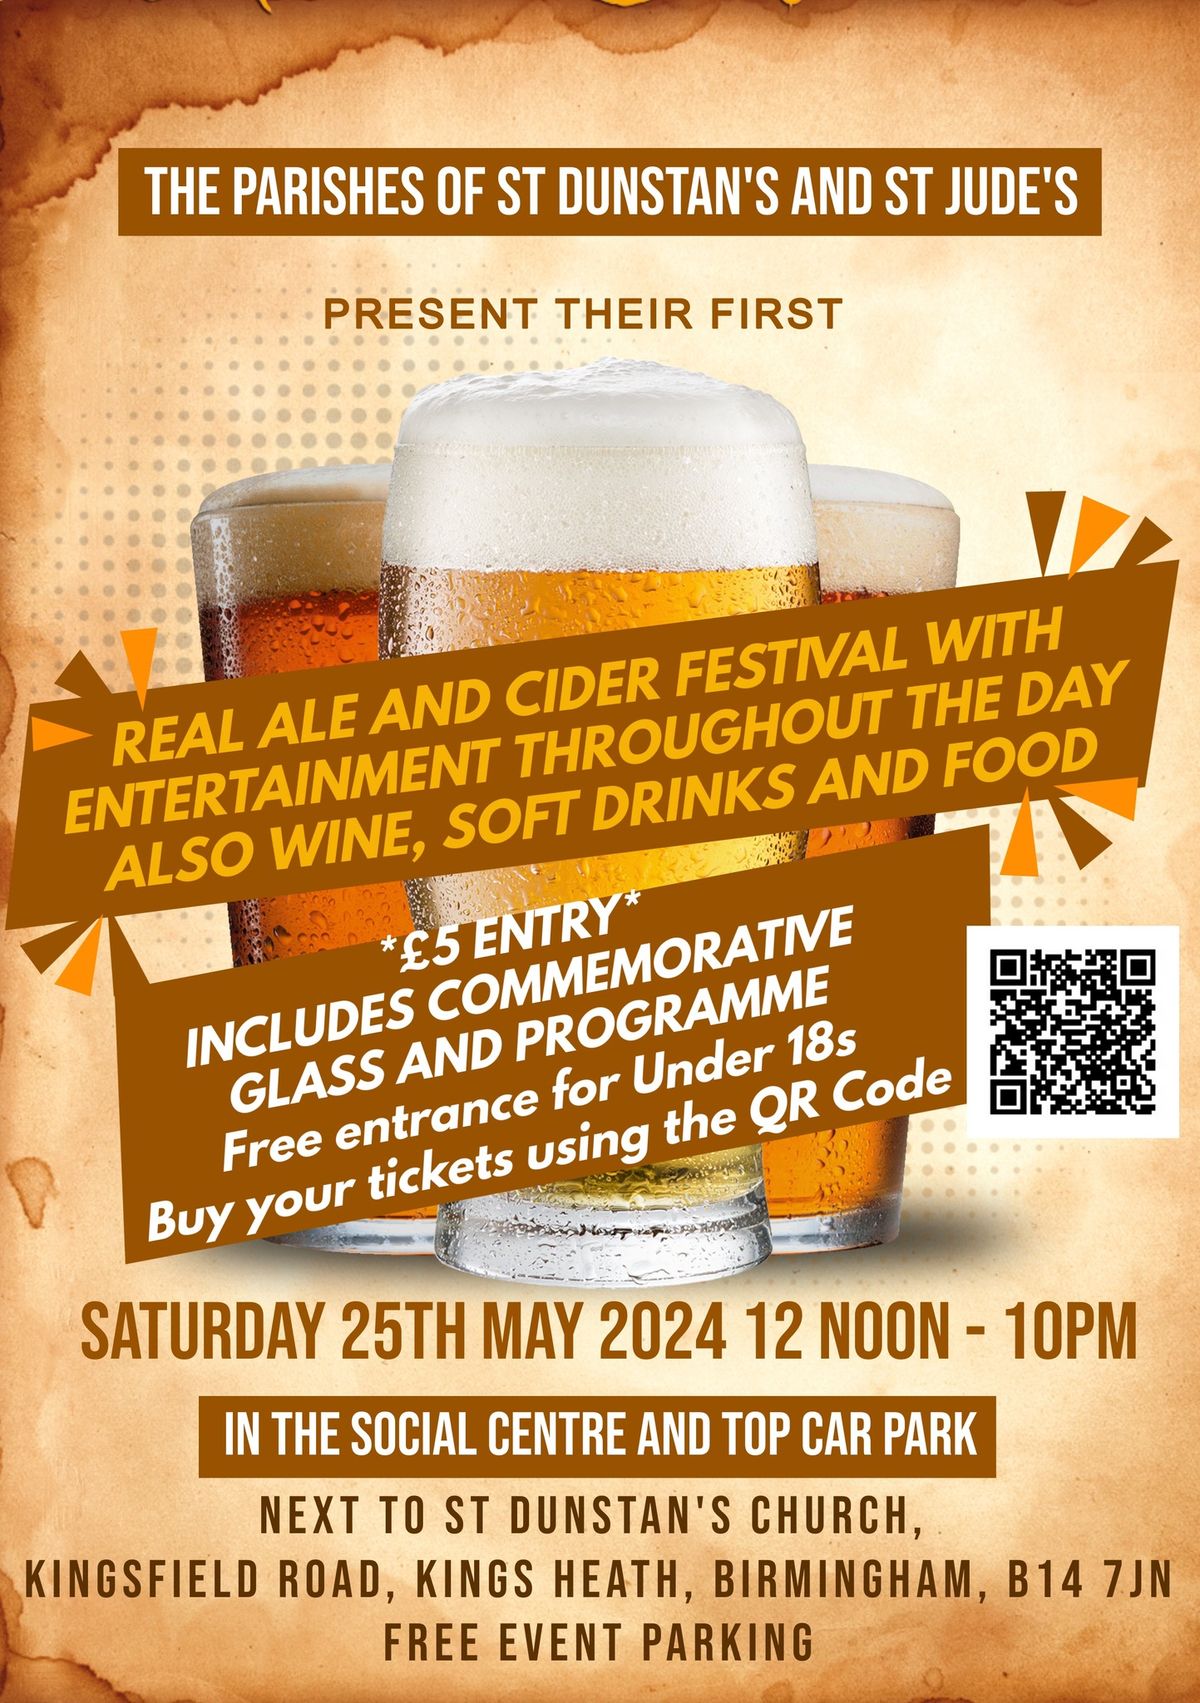 Real Ale and Cider Festival